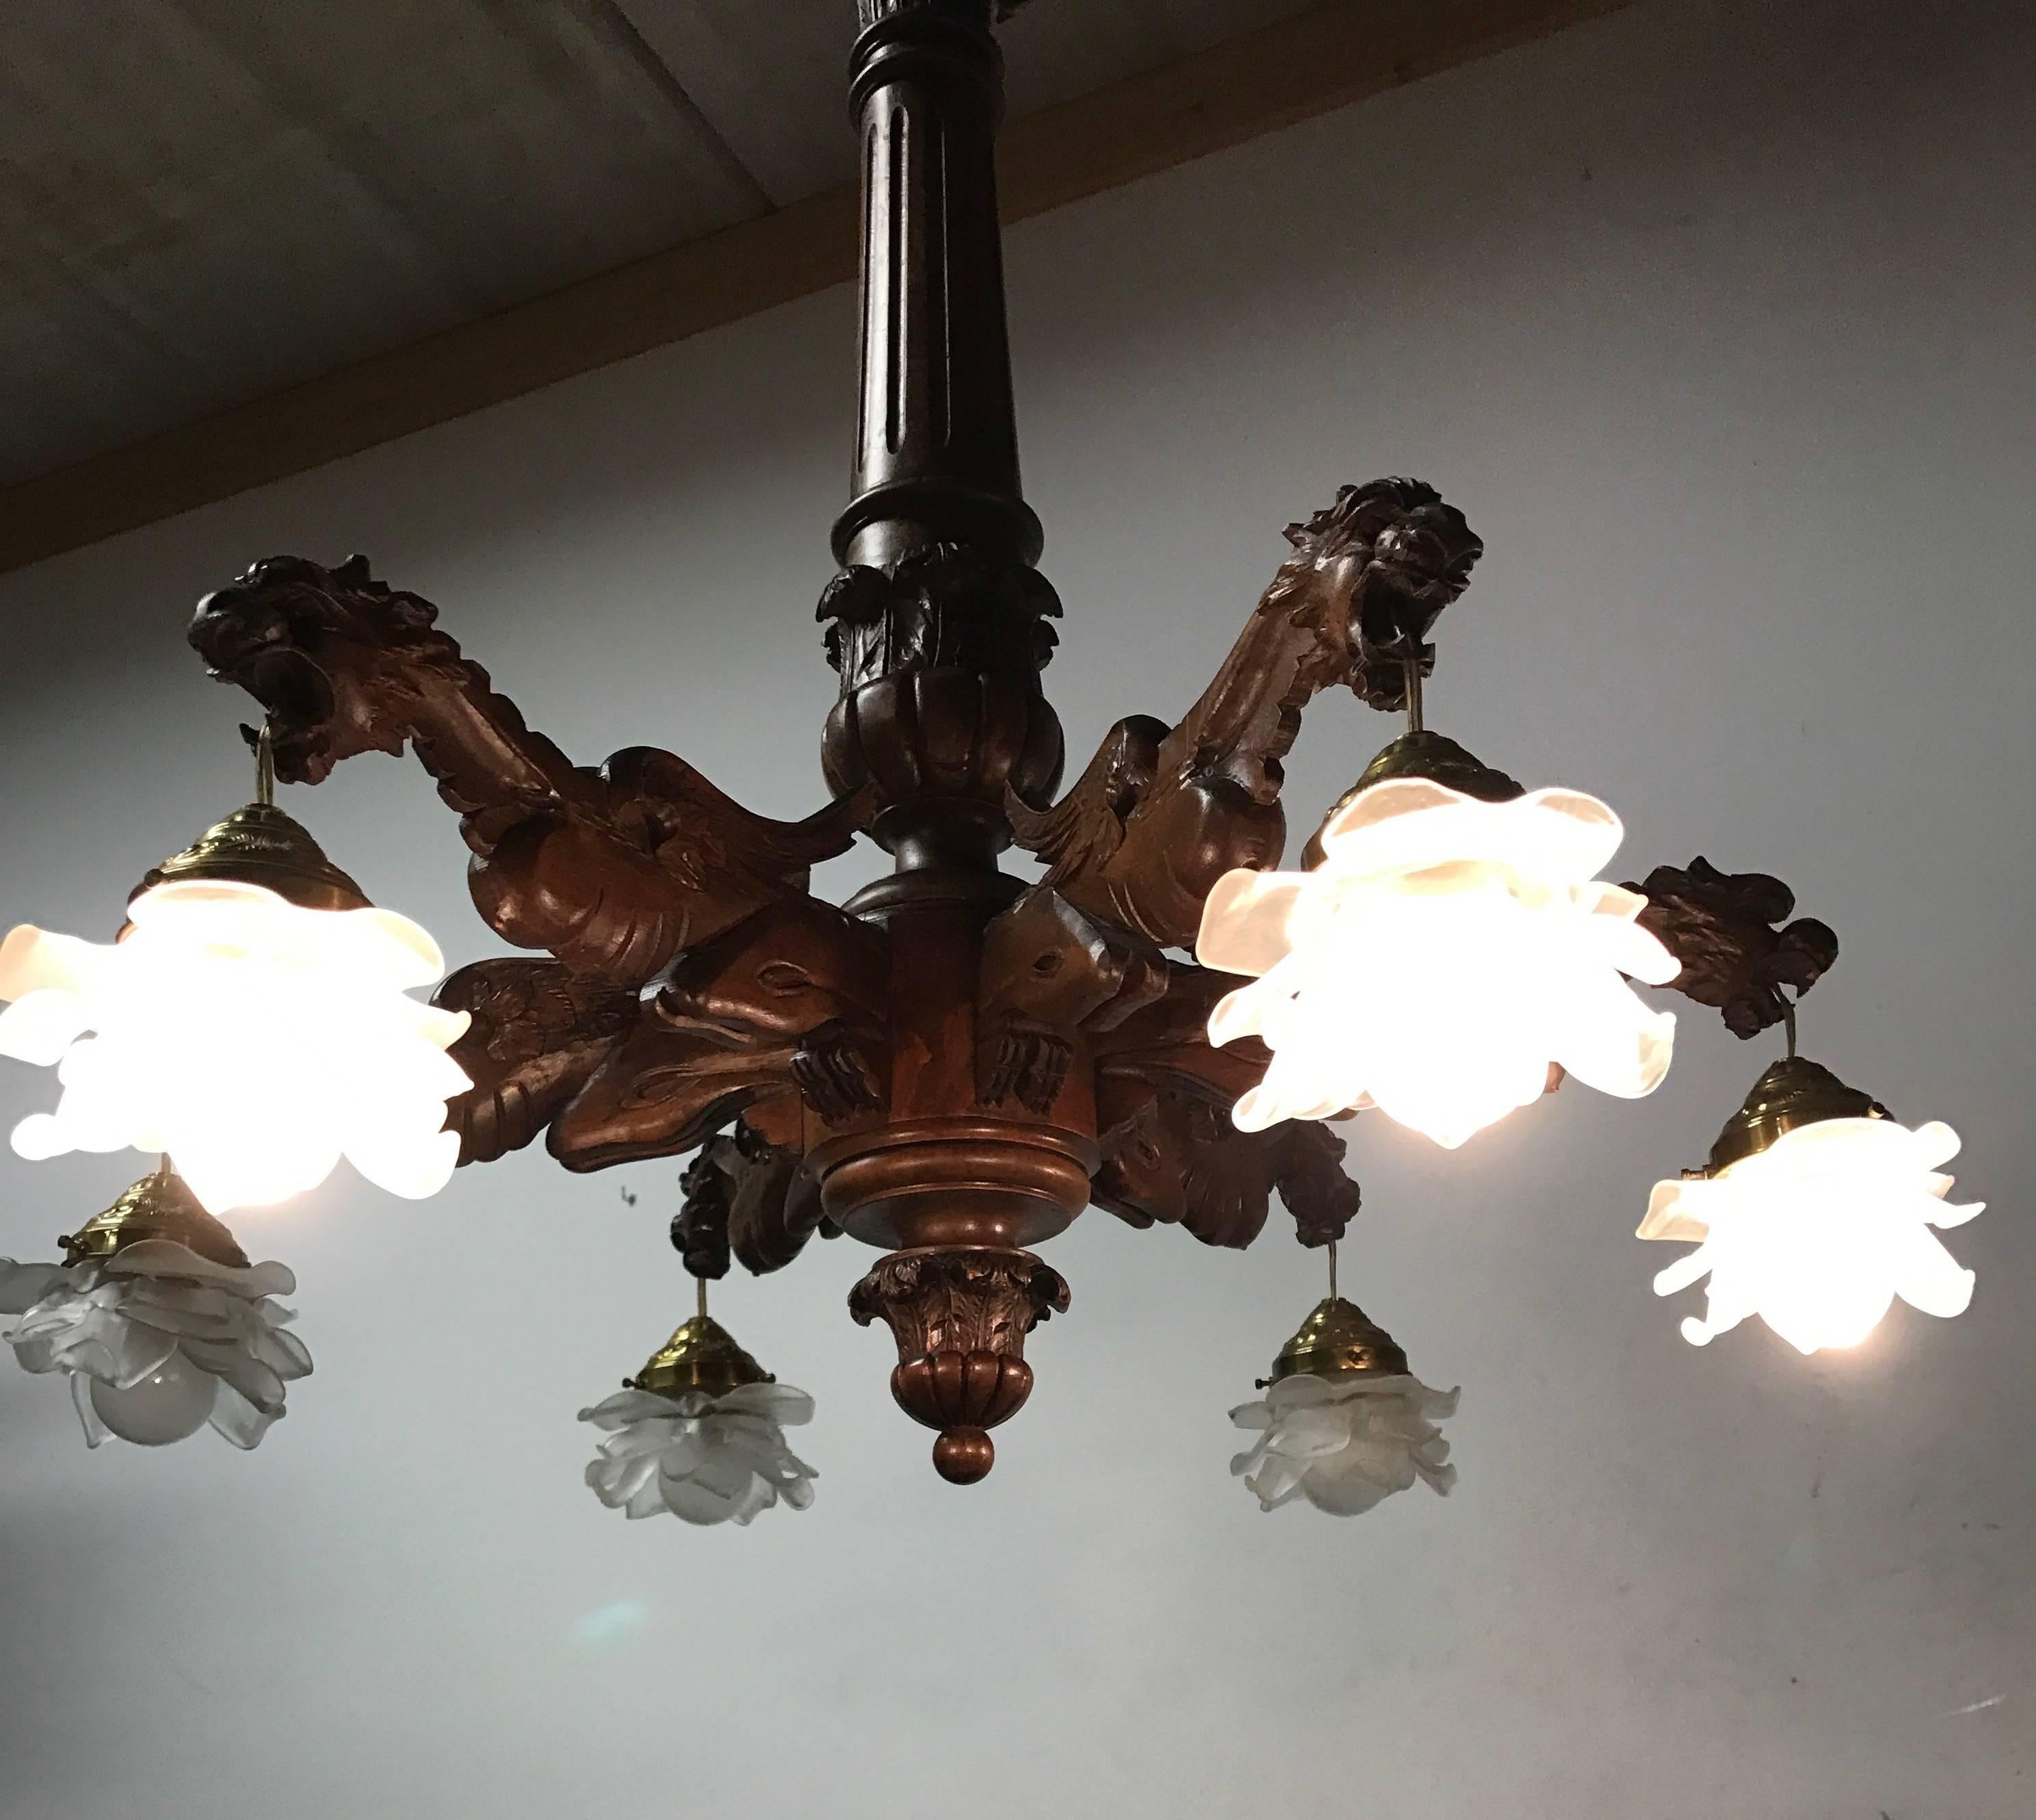  Stunning  Wooden Chandelier in Gothic or Medieval Style with Dragon Sculptures 1